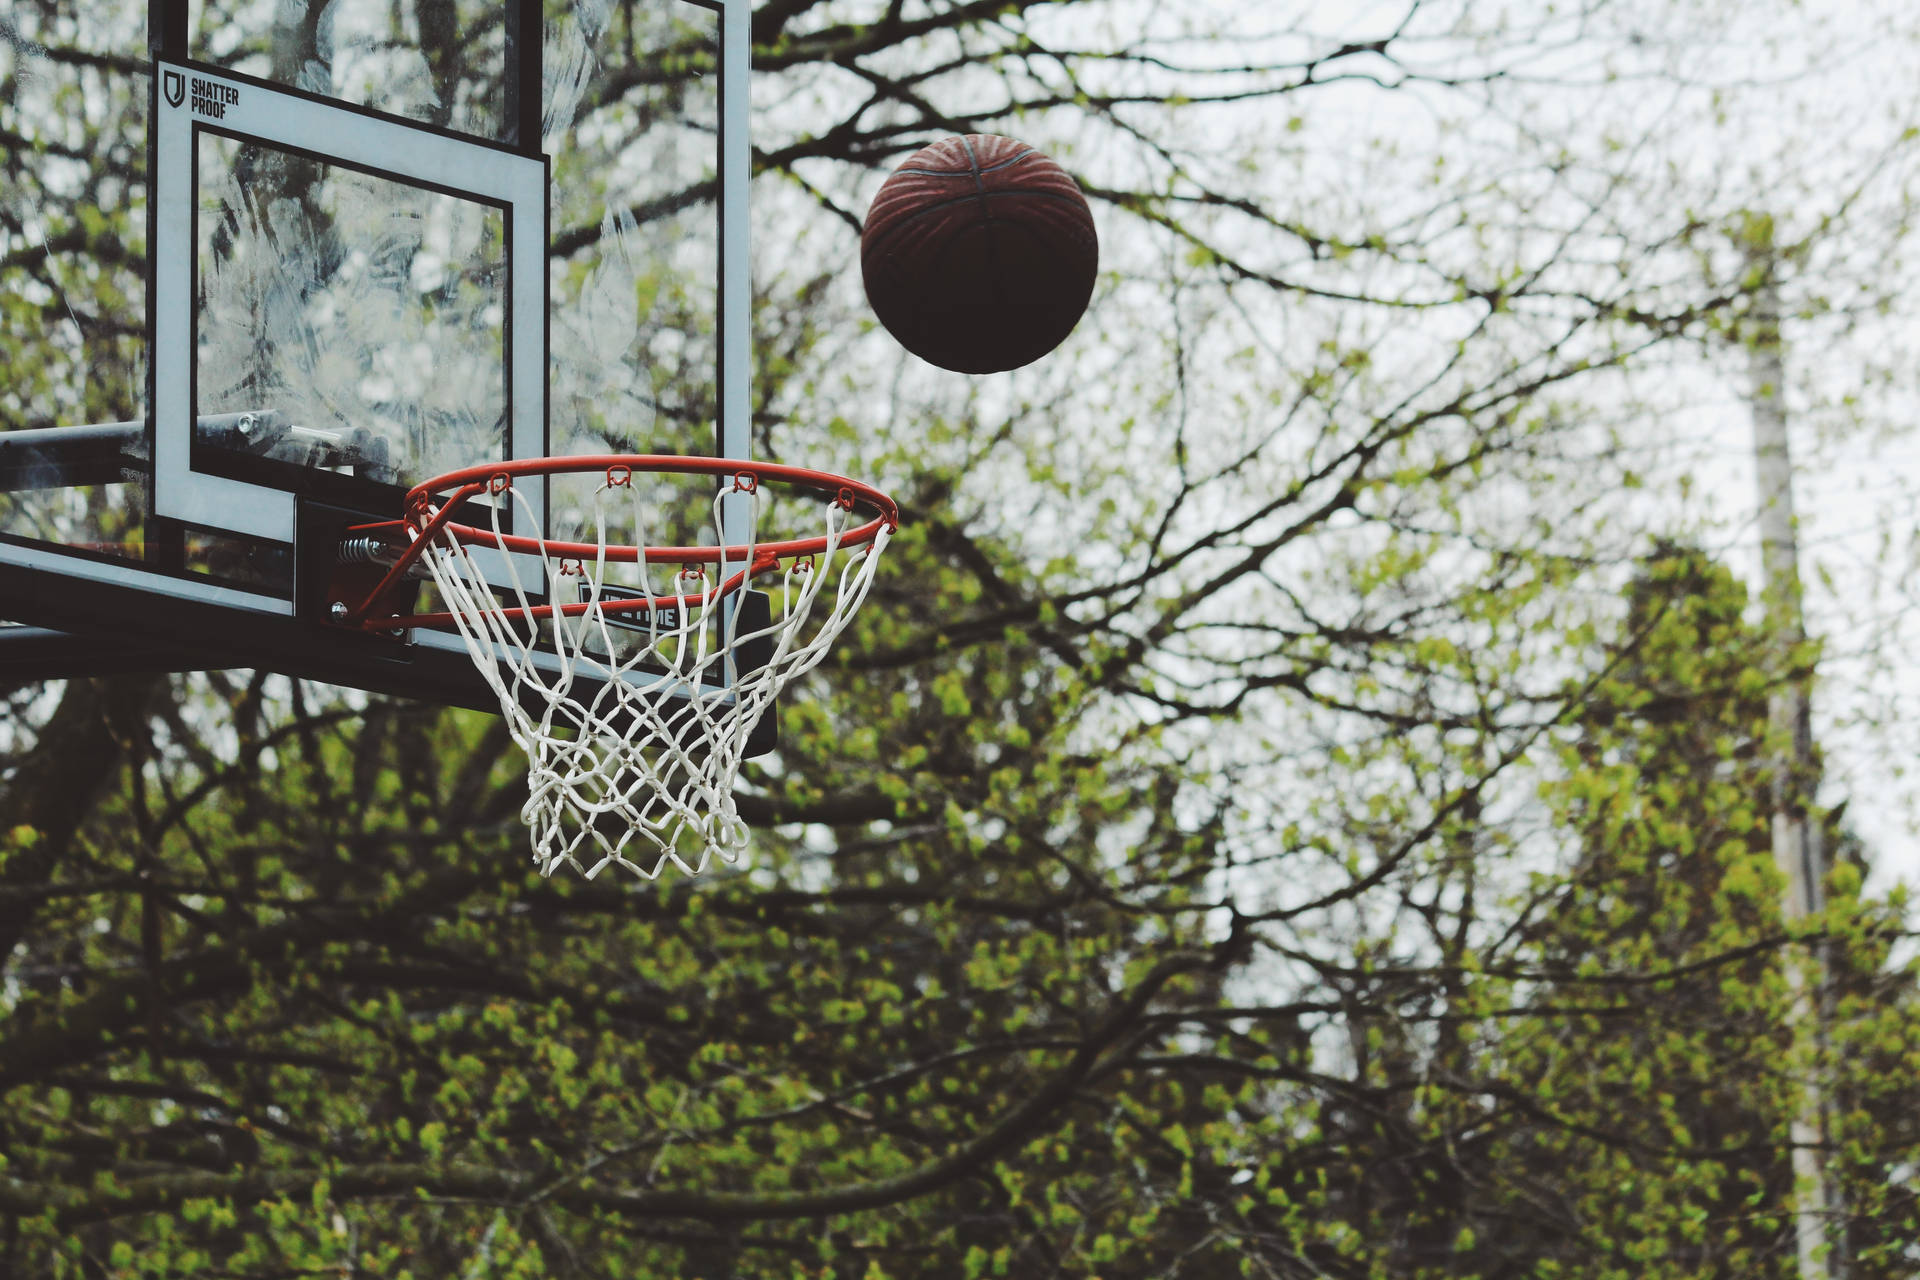 Basketball Ring Ball Throw On Trees Background